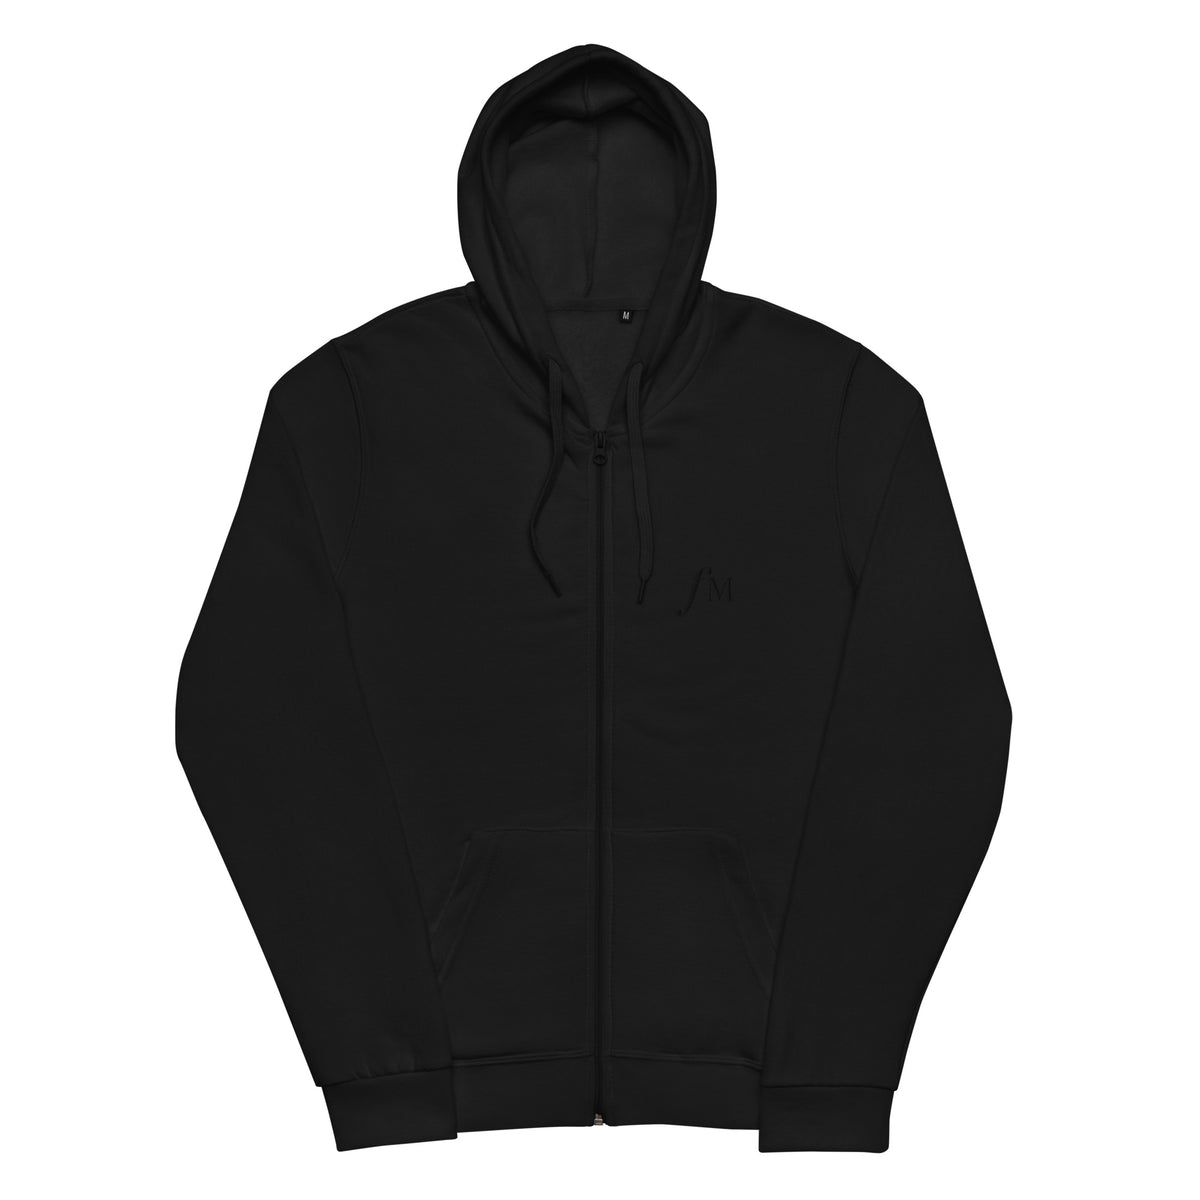 Classic FM Embroidered Black Zip Hoodie